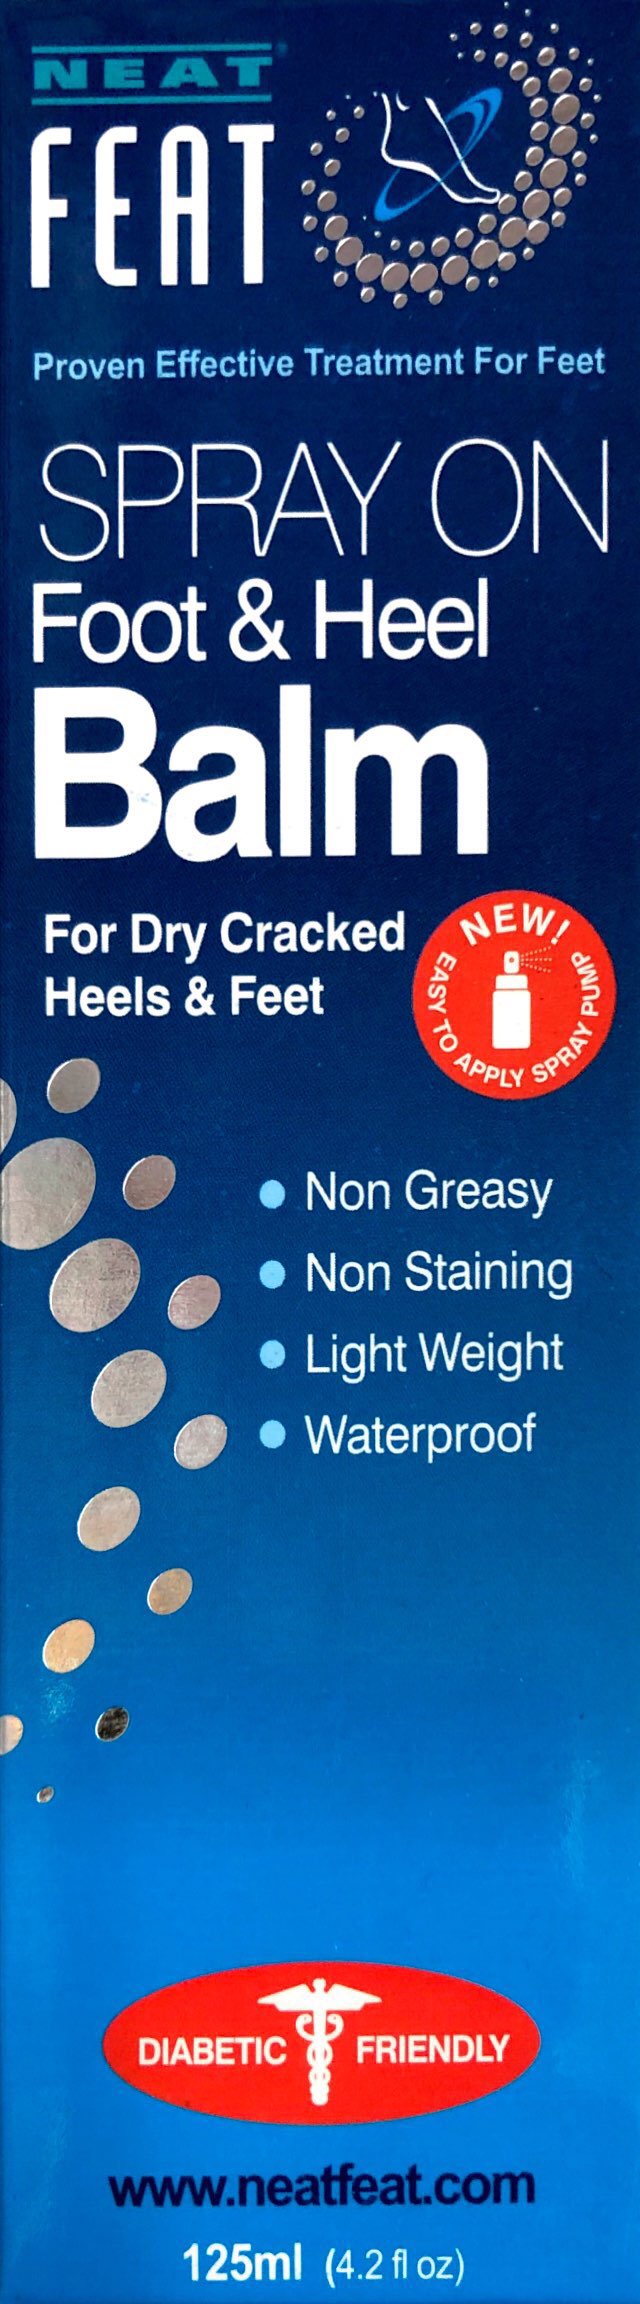 Neat Feat Foot and Heel Balm Spray For Dry Cracked Heels & Feet 125ml